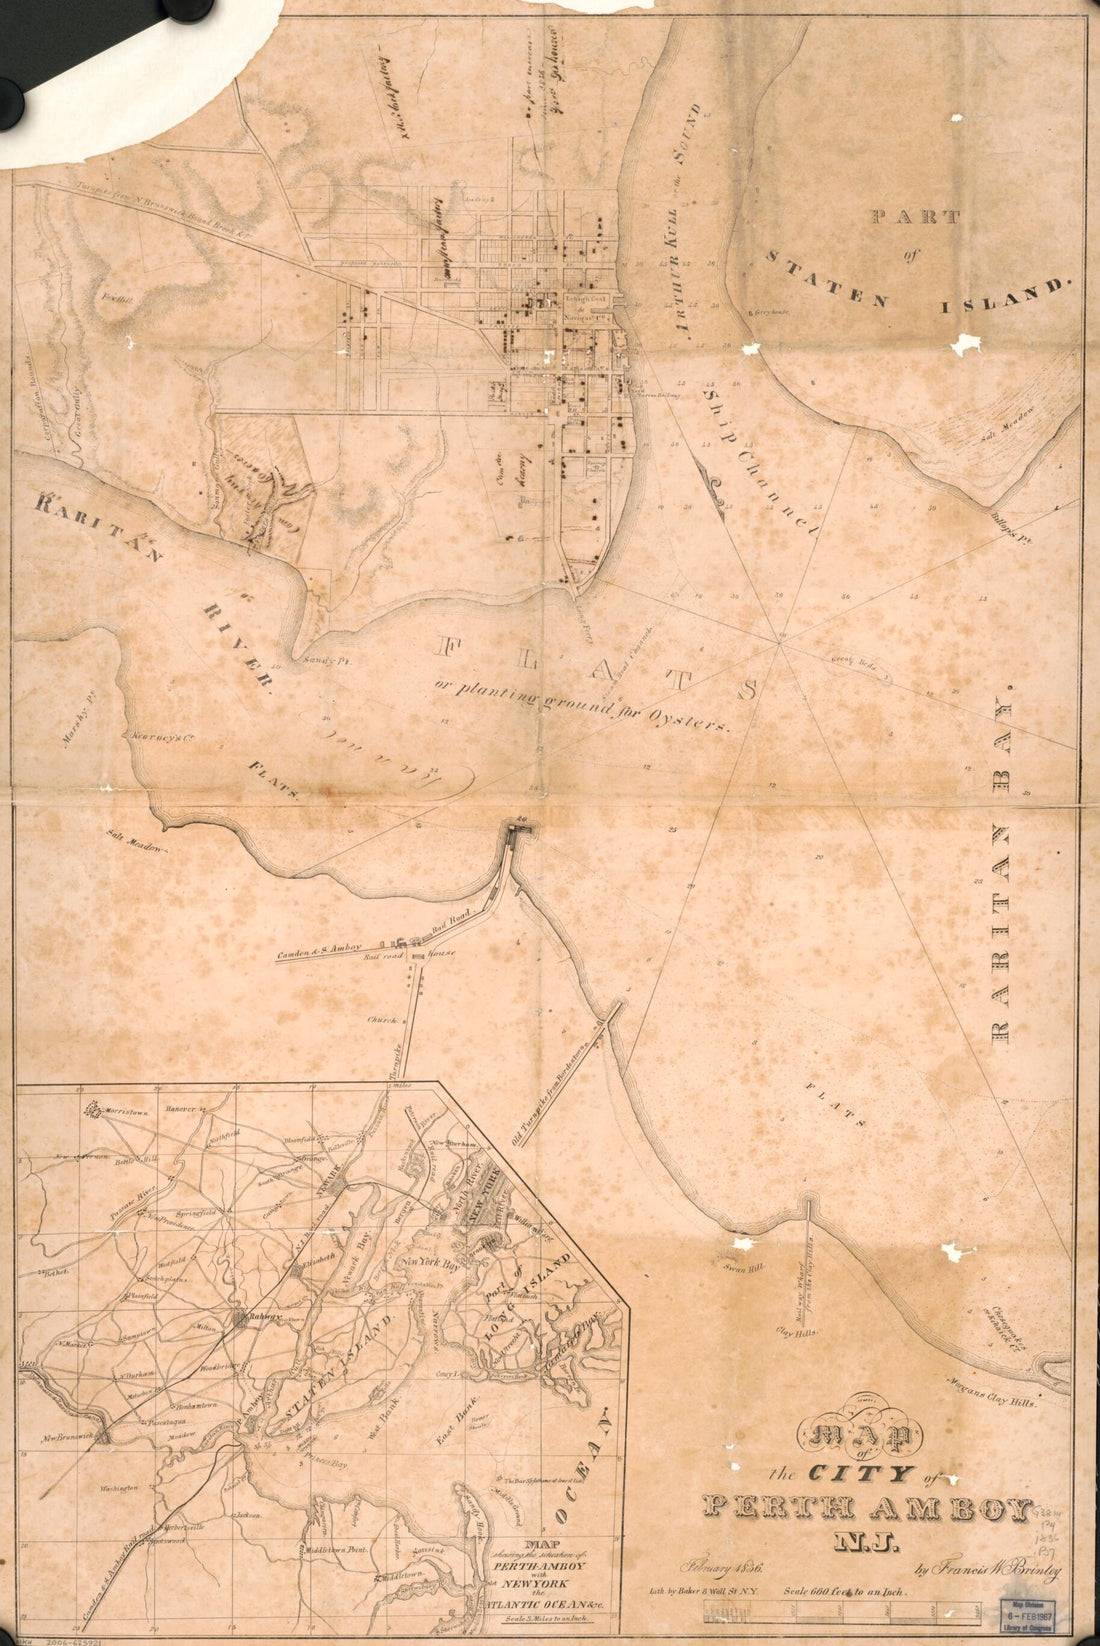 This old map of Map of the City of Perth Amboy, New Jersey : February from 1836 was created by N.Y.) Baker (Lithographer : New York, Francis W. Brinley in 1836